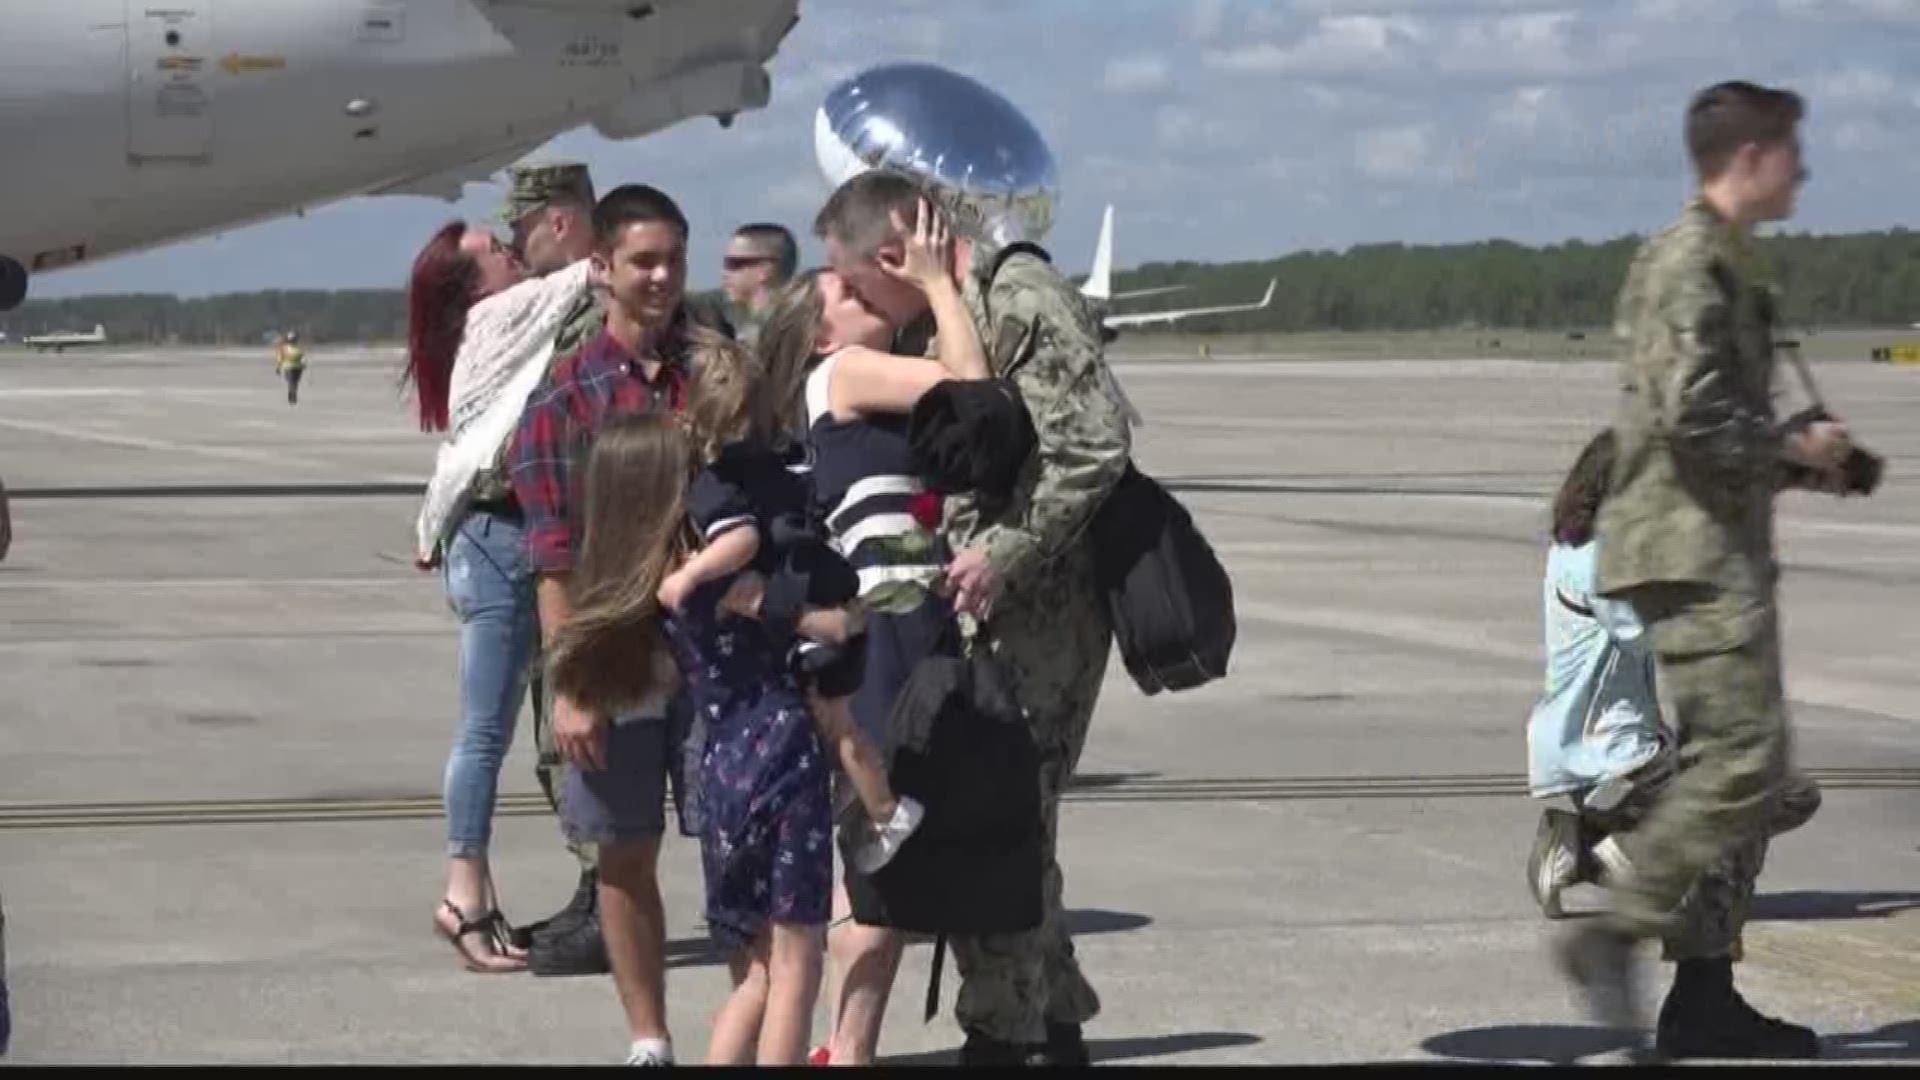 Today more than 200 sailors have returned home on three separate flights back to families and friends here at NAS JAX from a six month deployment.